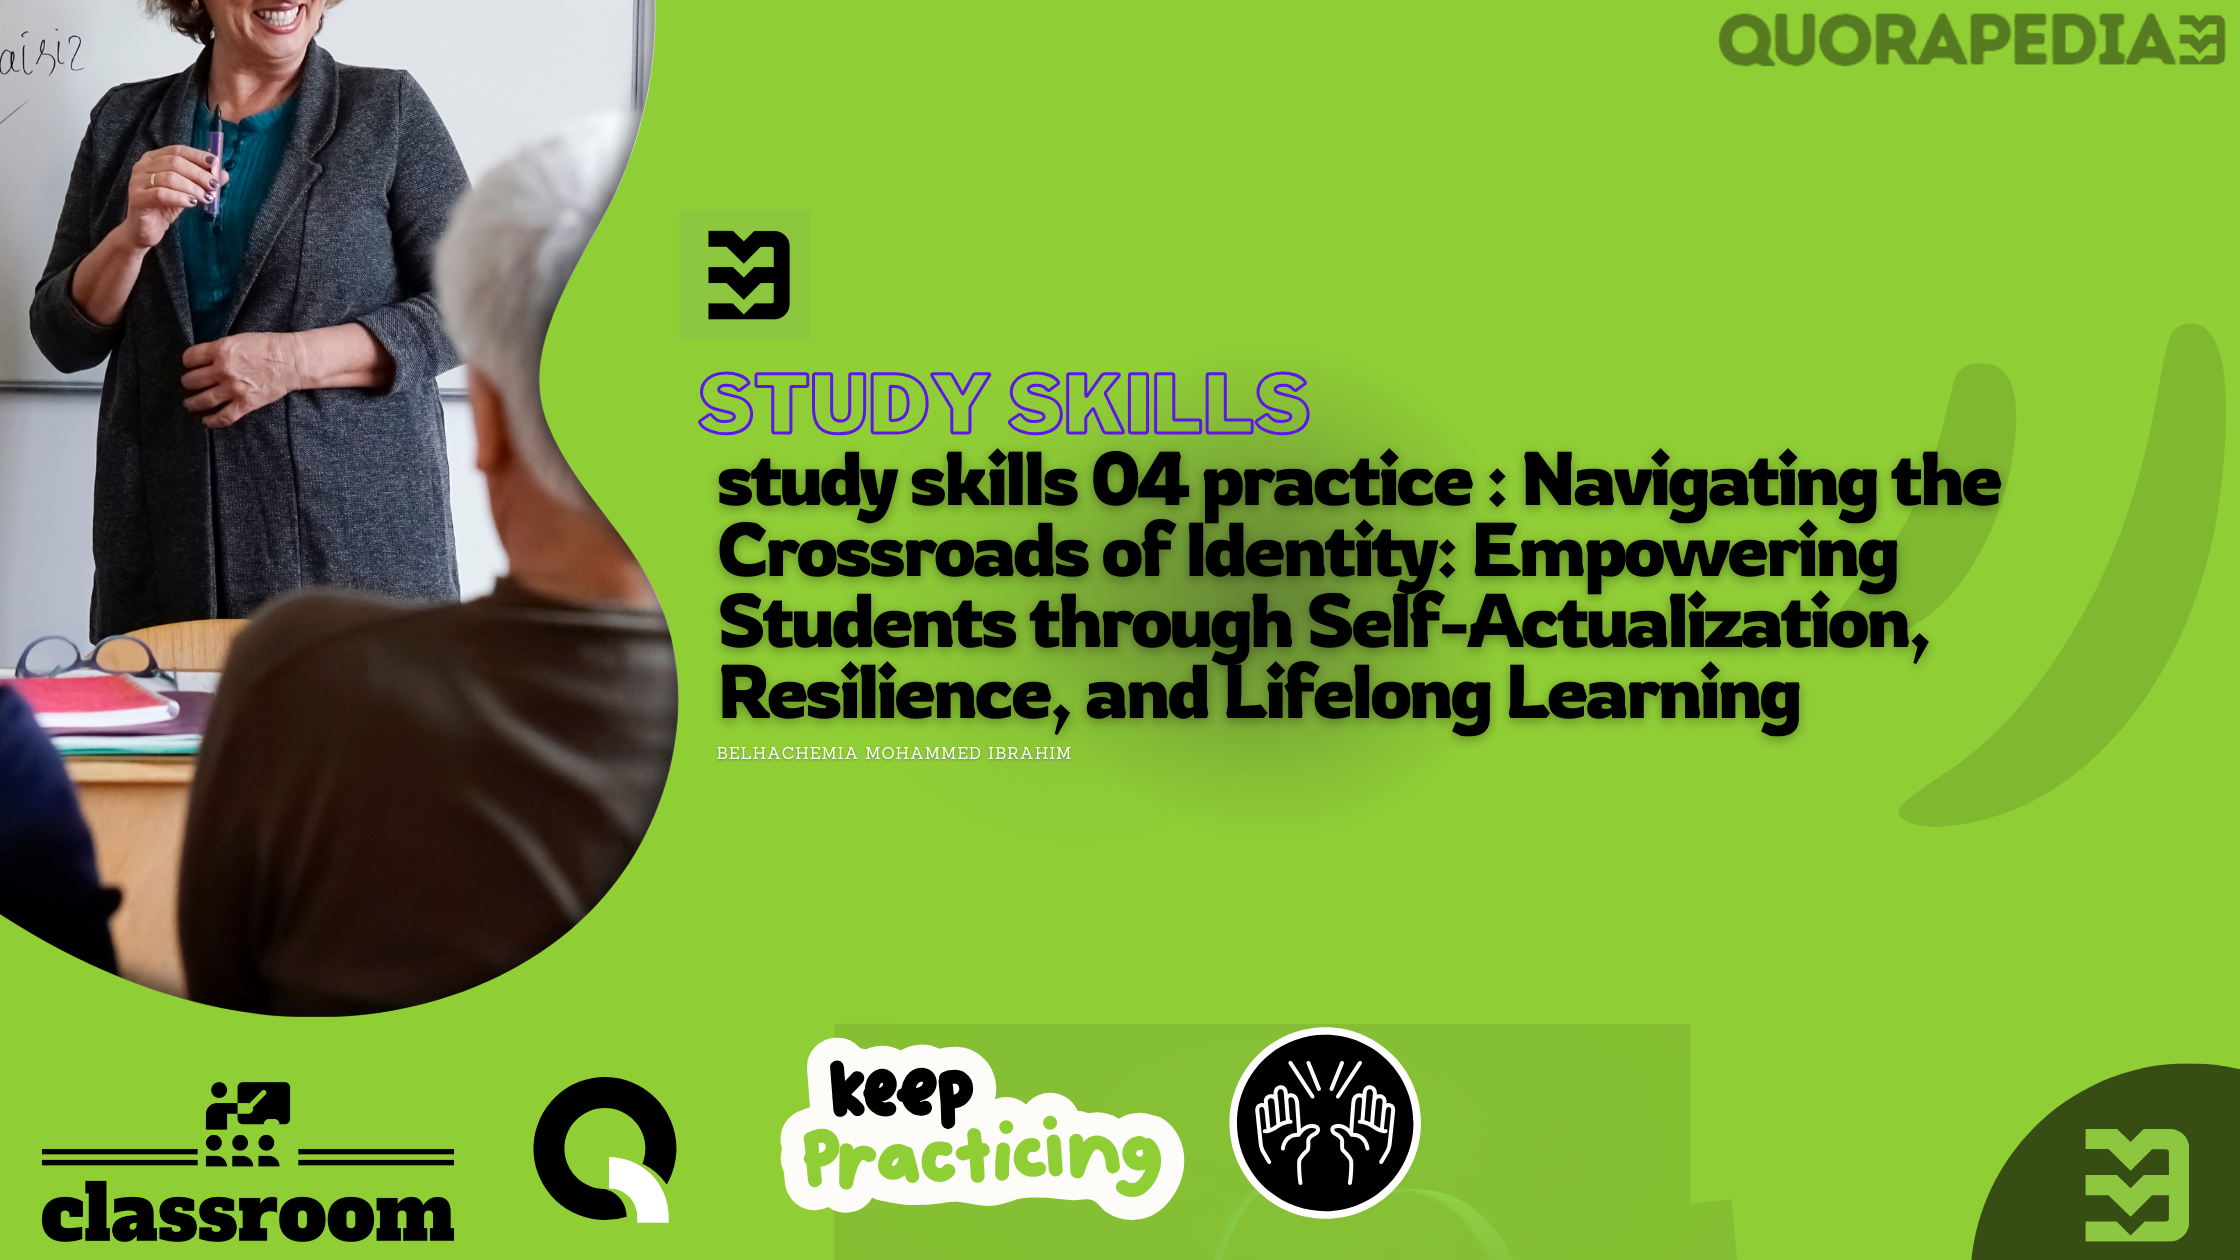 study skills 04 practice : Navigating the Crossroads of Identity: Empowering Students through Self-Actualization, Resilience, and Lifelong Learning